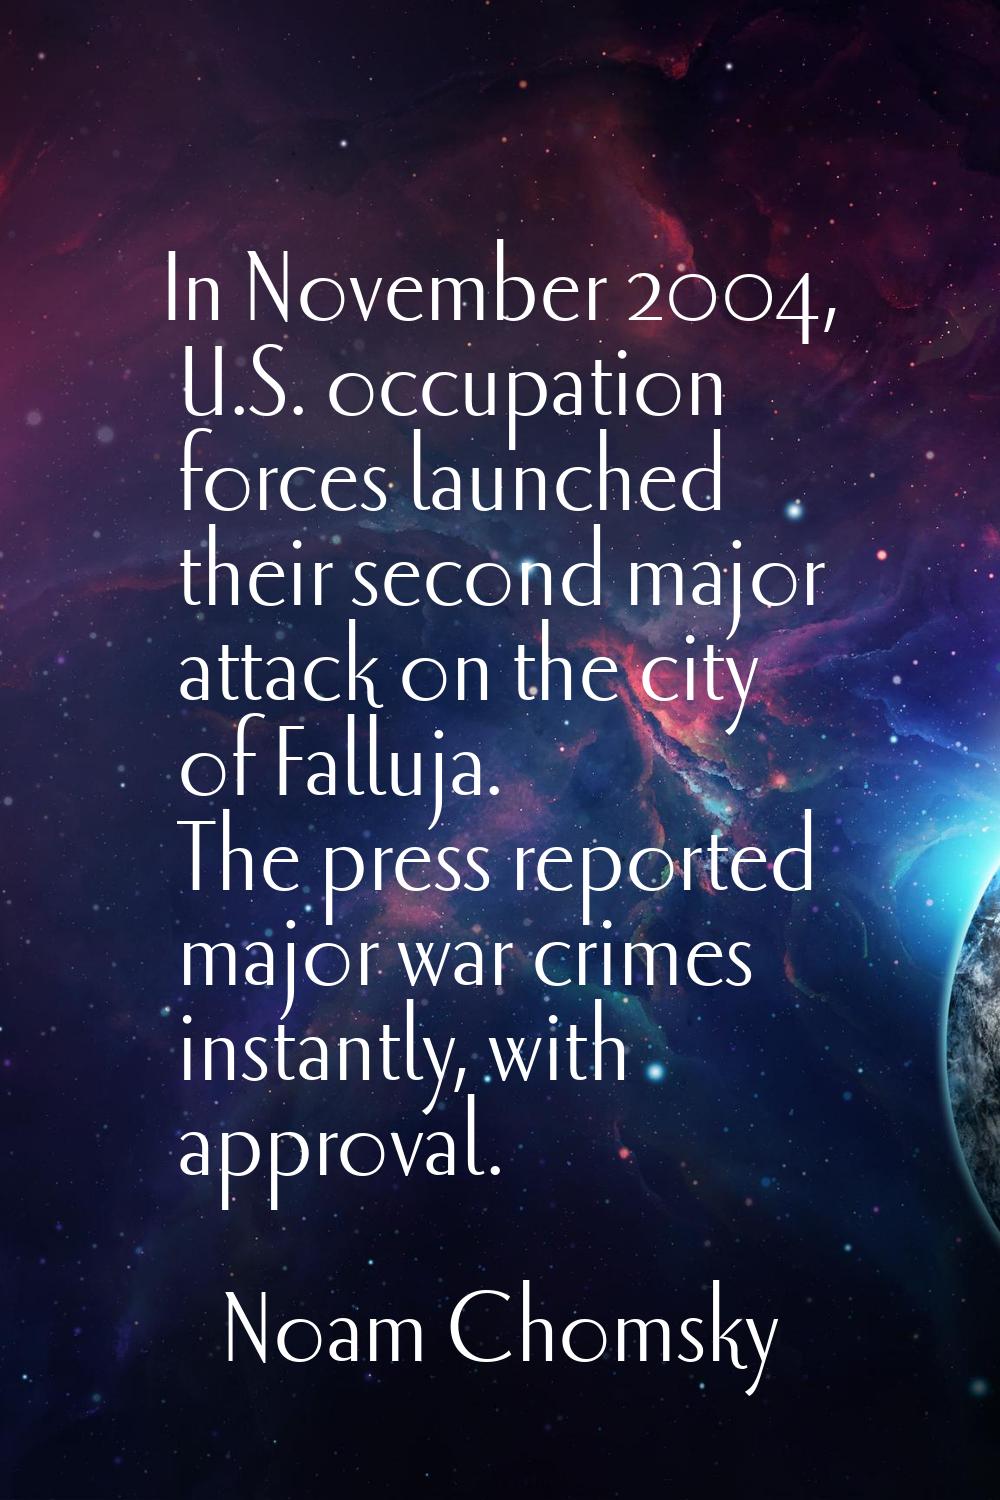 In November 2004, U.S. occupation forces launched their second major attack on the city of Falluja.